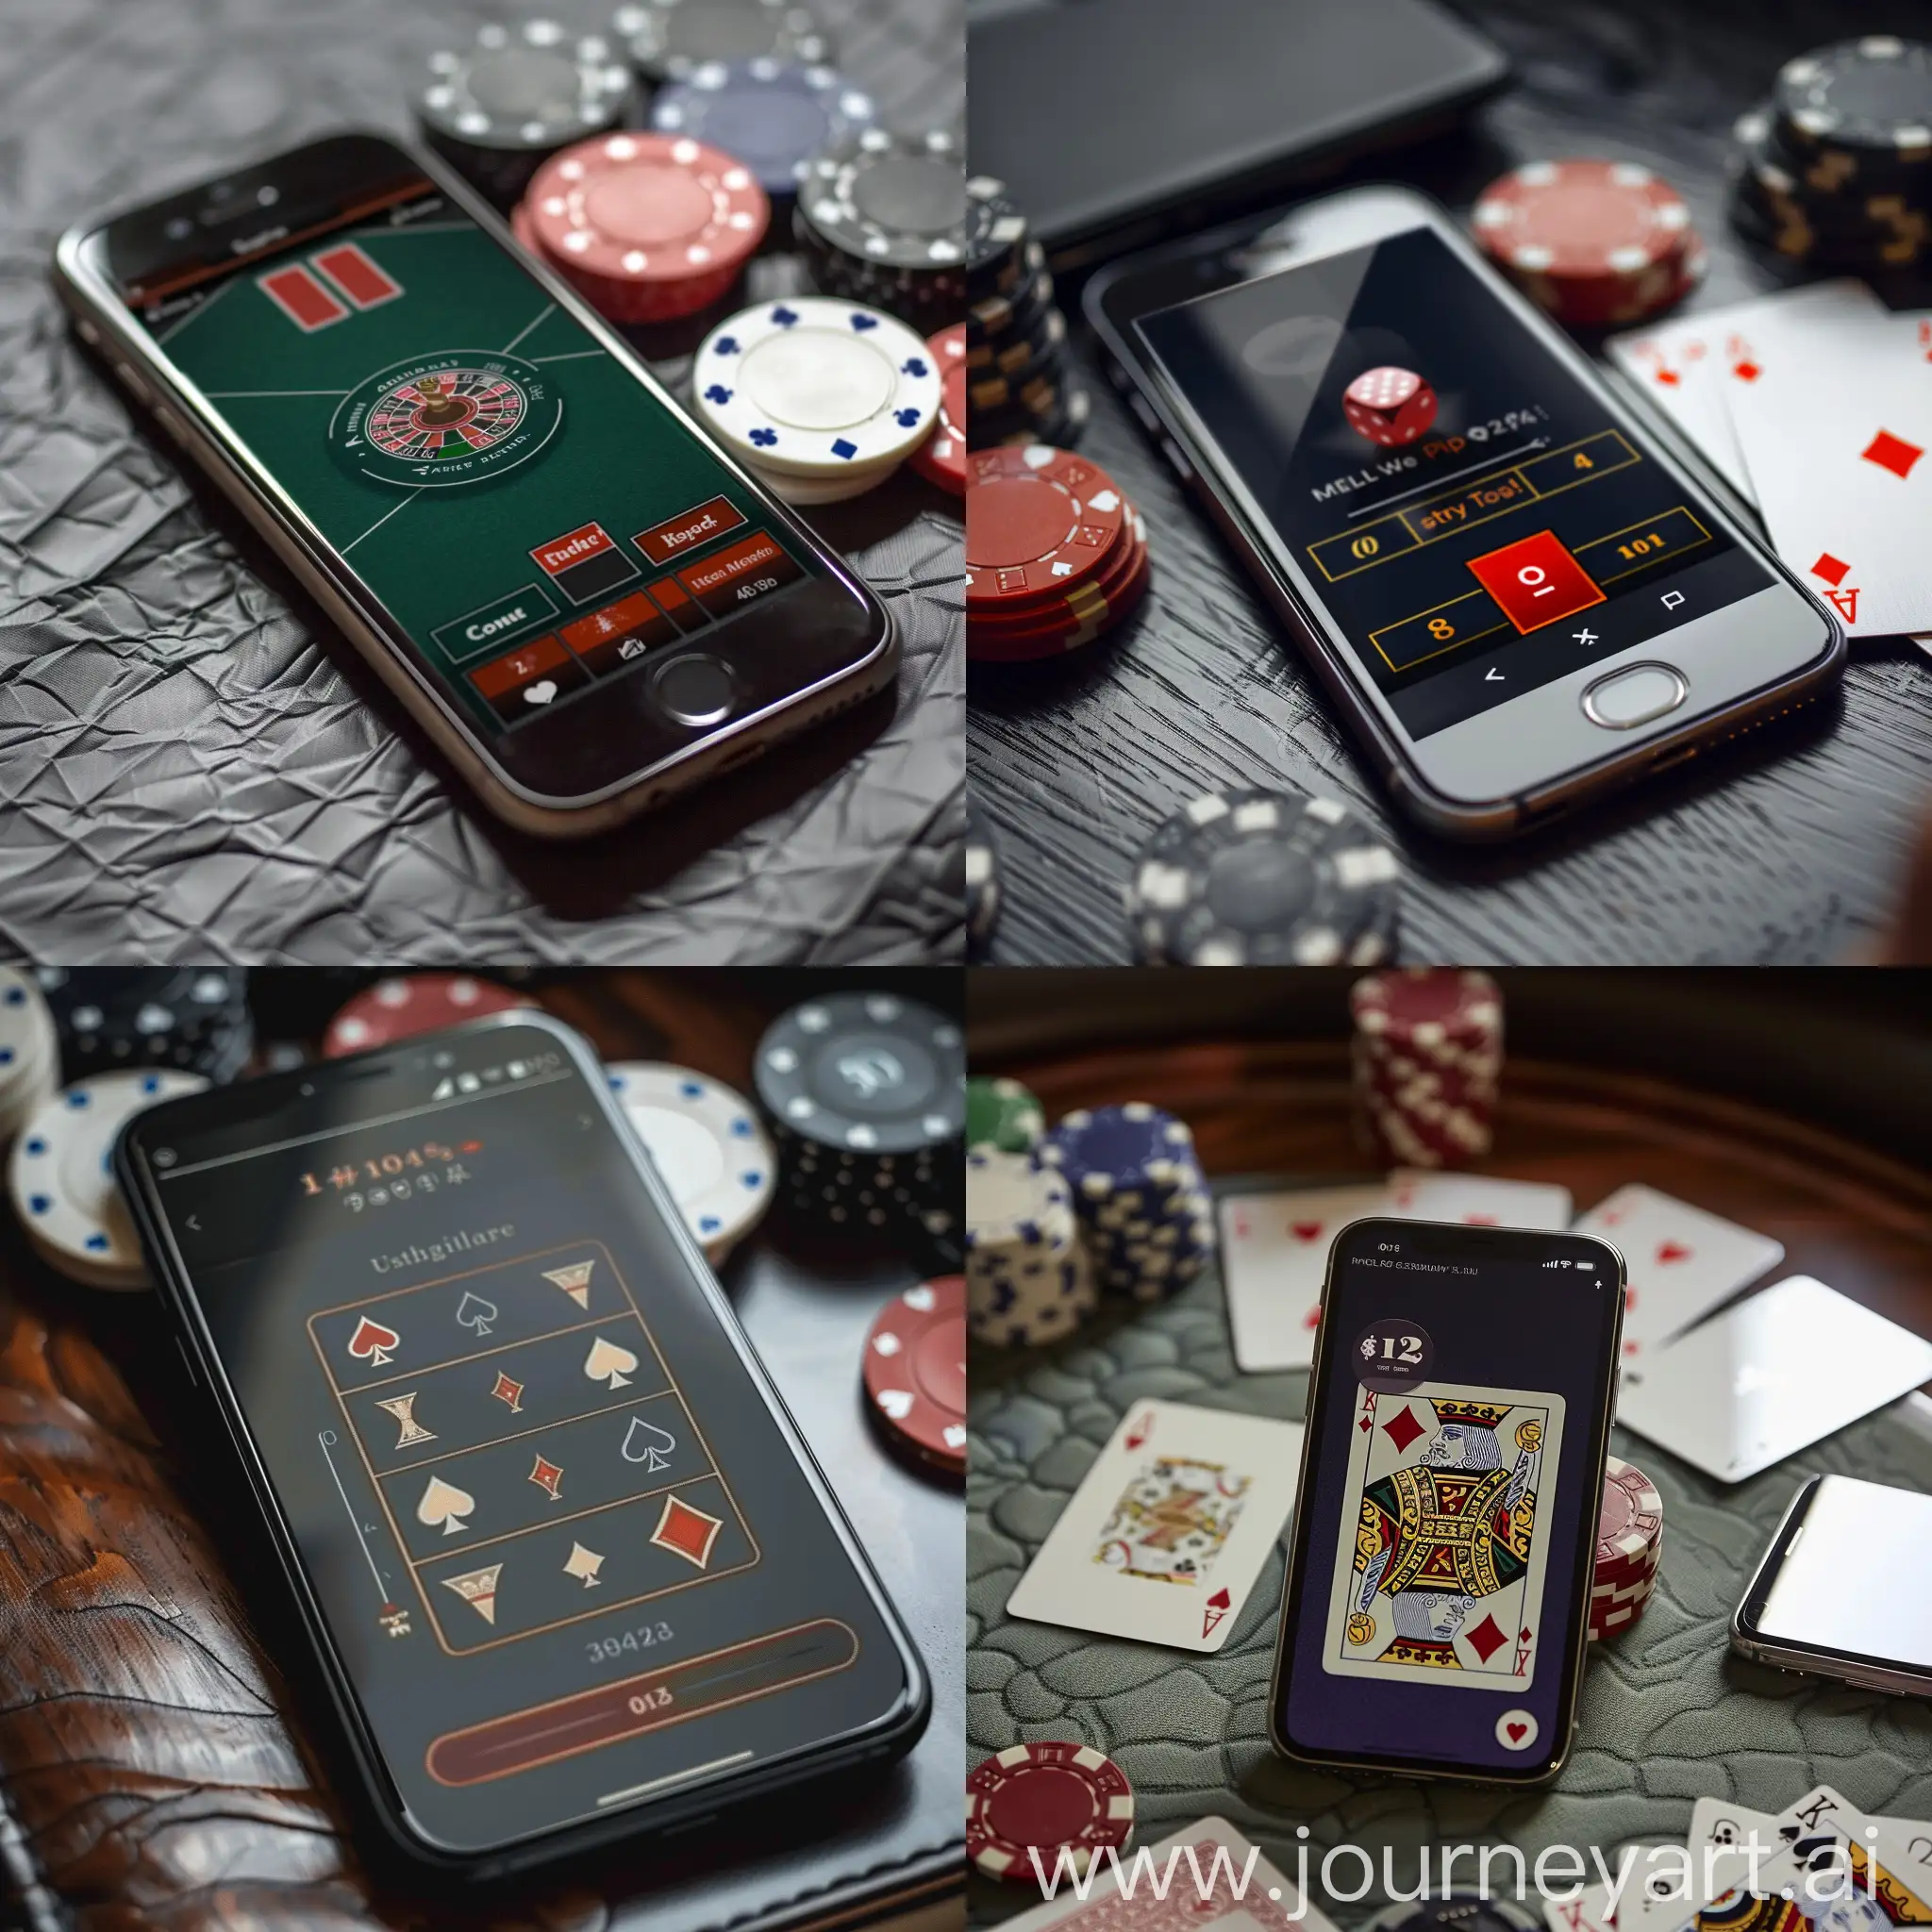 mobile phone user interface for a poker game